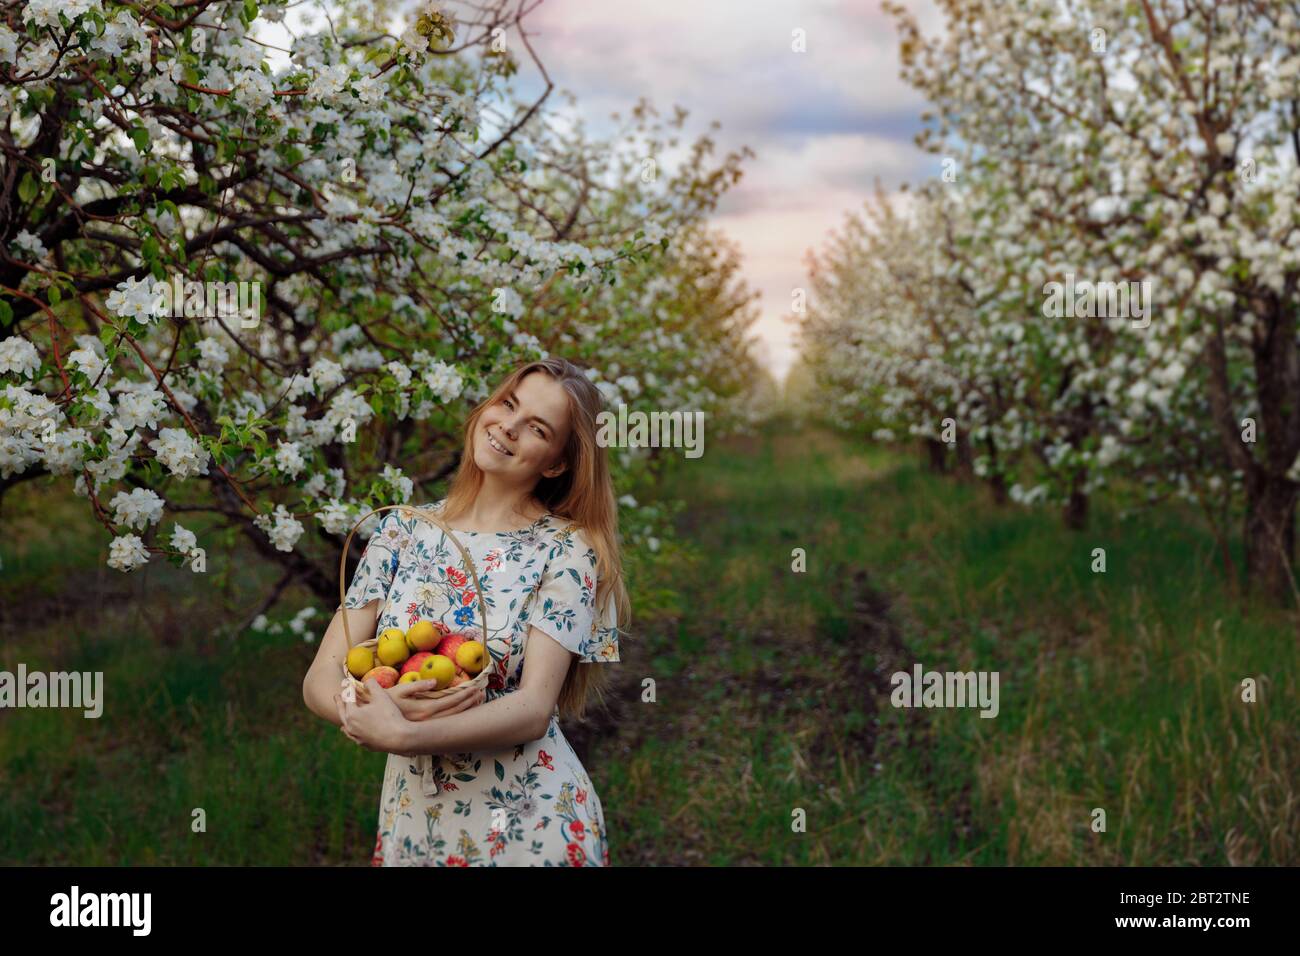 A smiling girl in a white dress stands in a beautiful Apple orchard Stock Photo